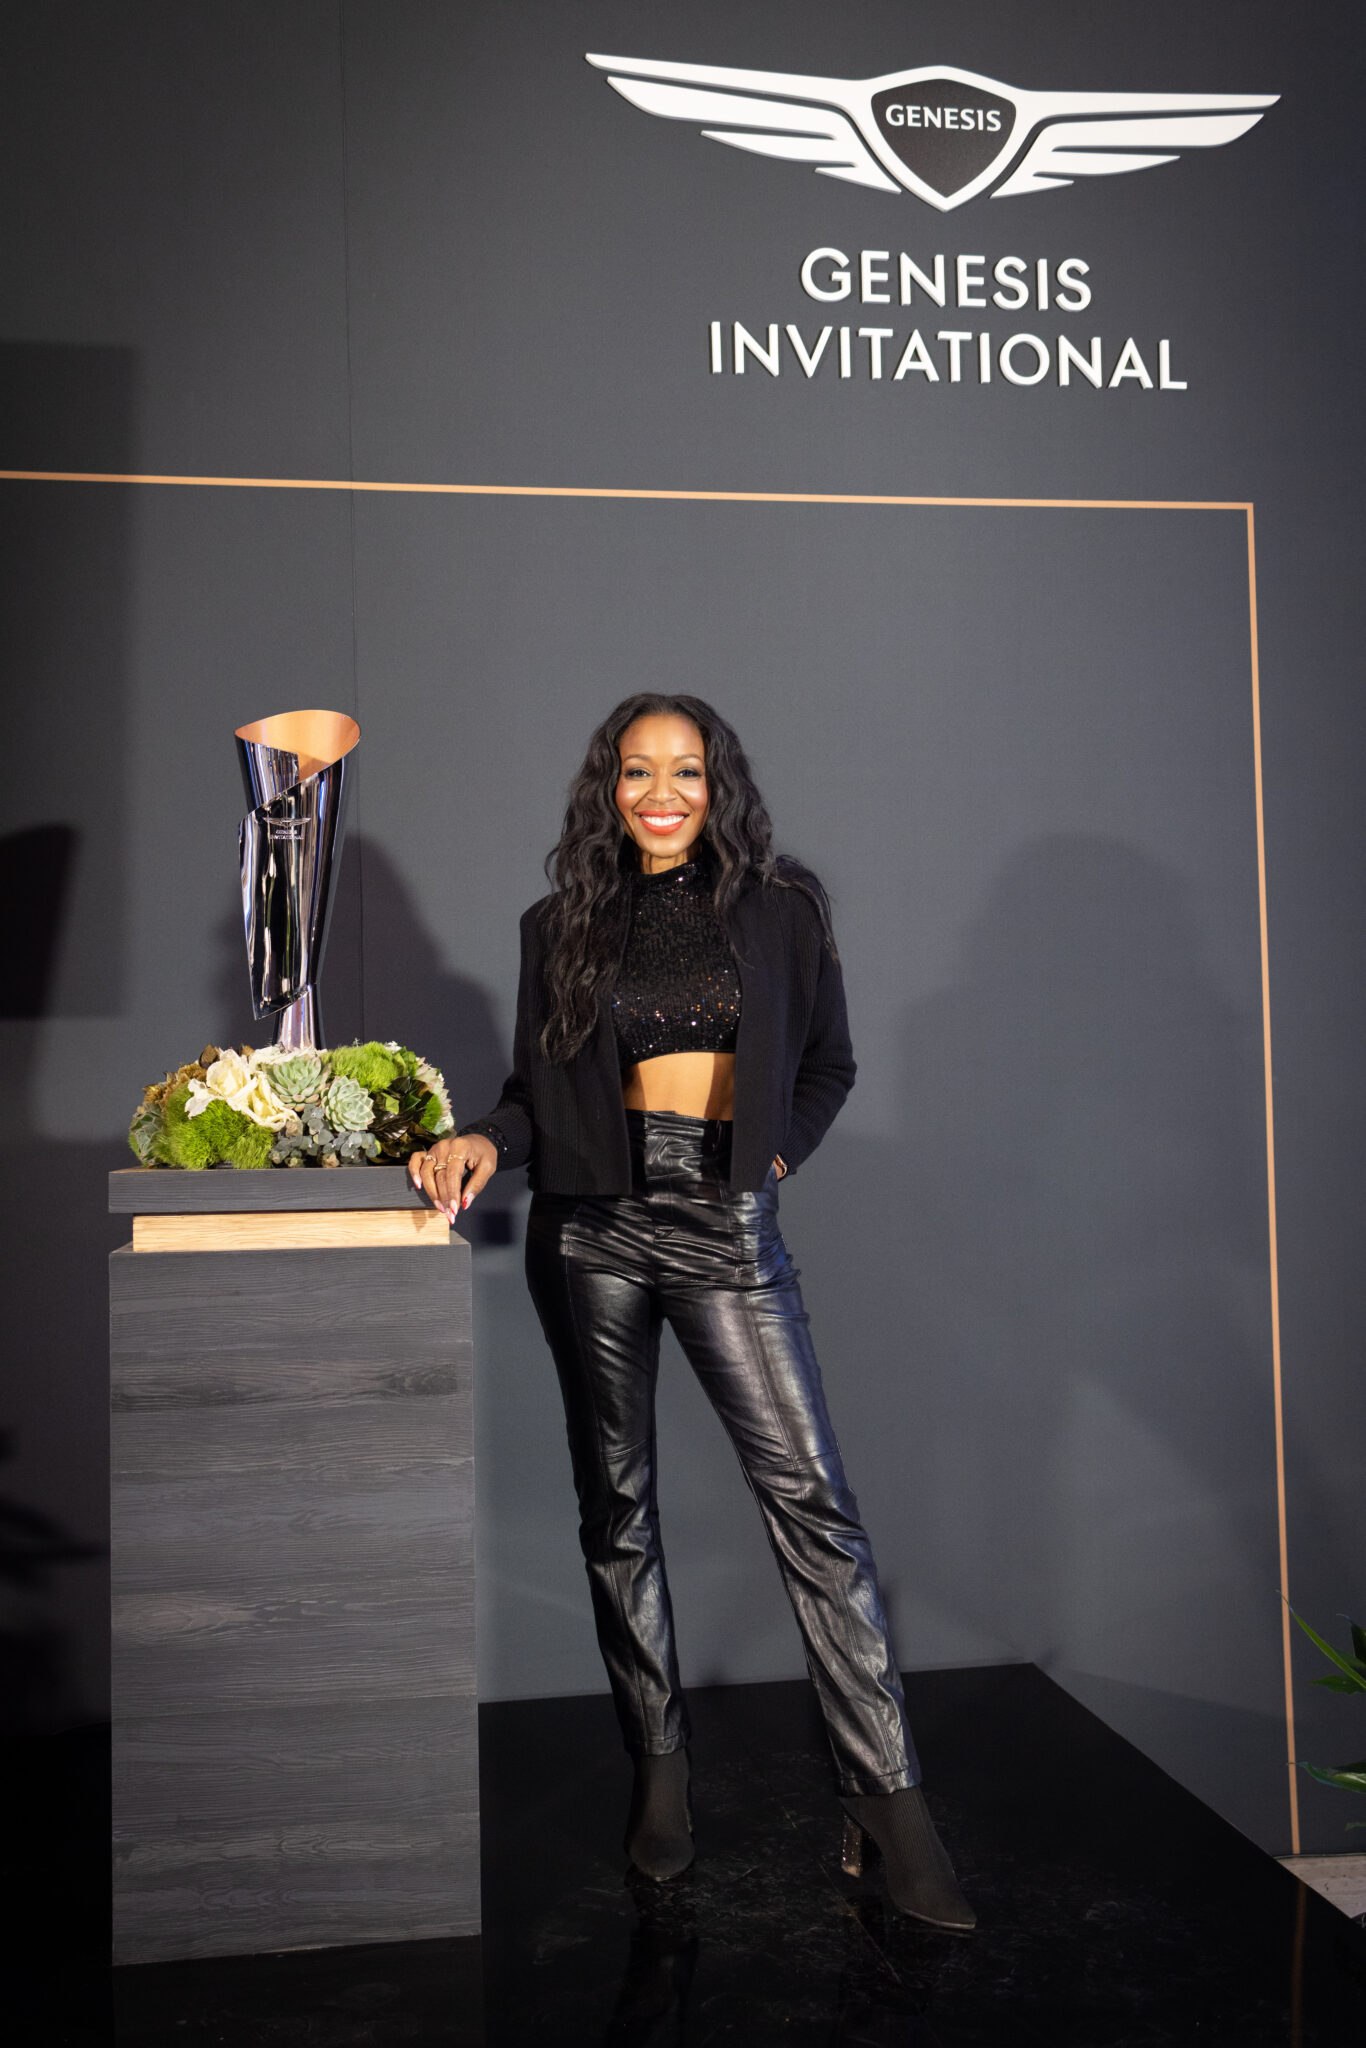 Genesis Continues to Elevate Modern Luxury at The Genesis Invitational STYLE and SOCIETY Magazine